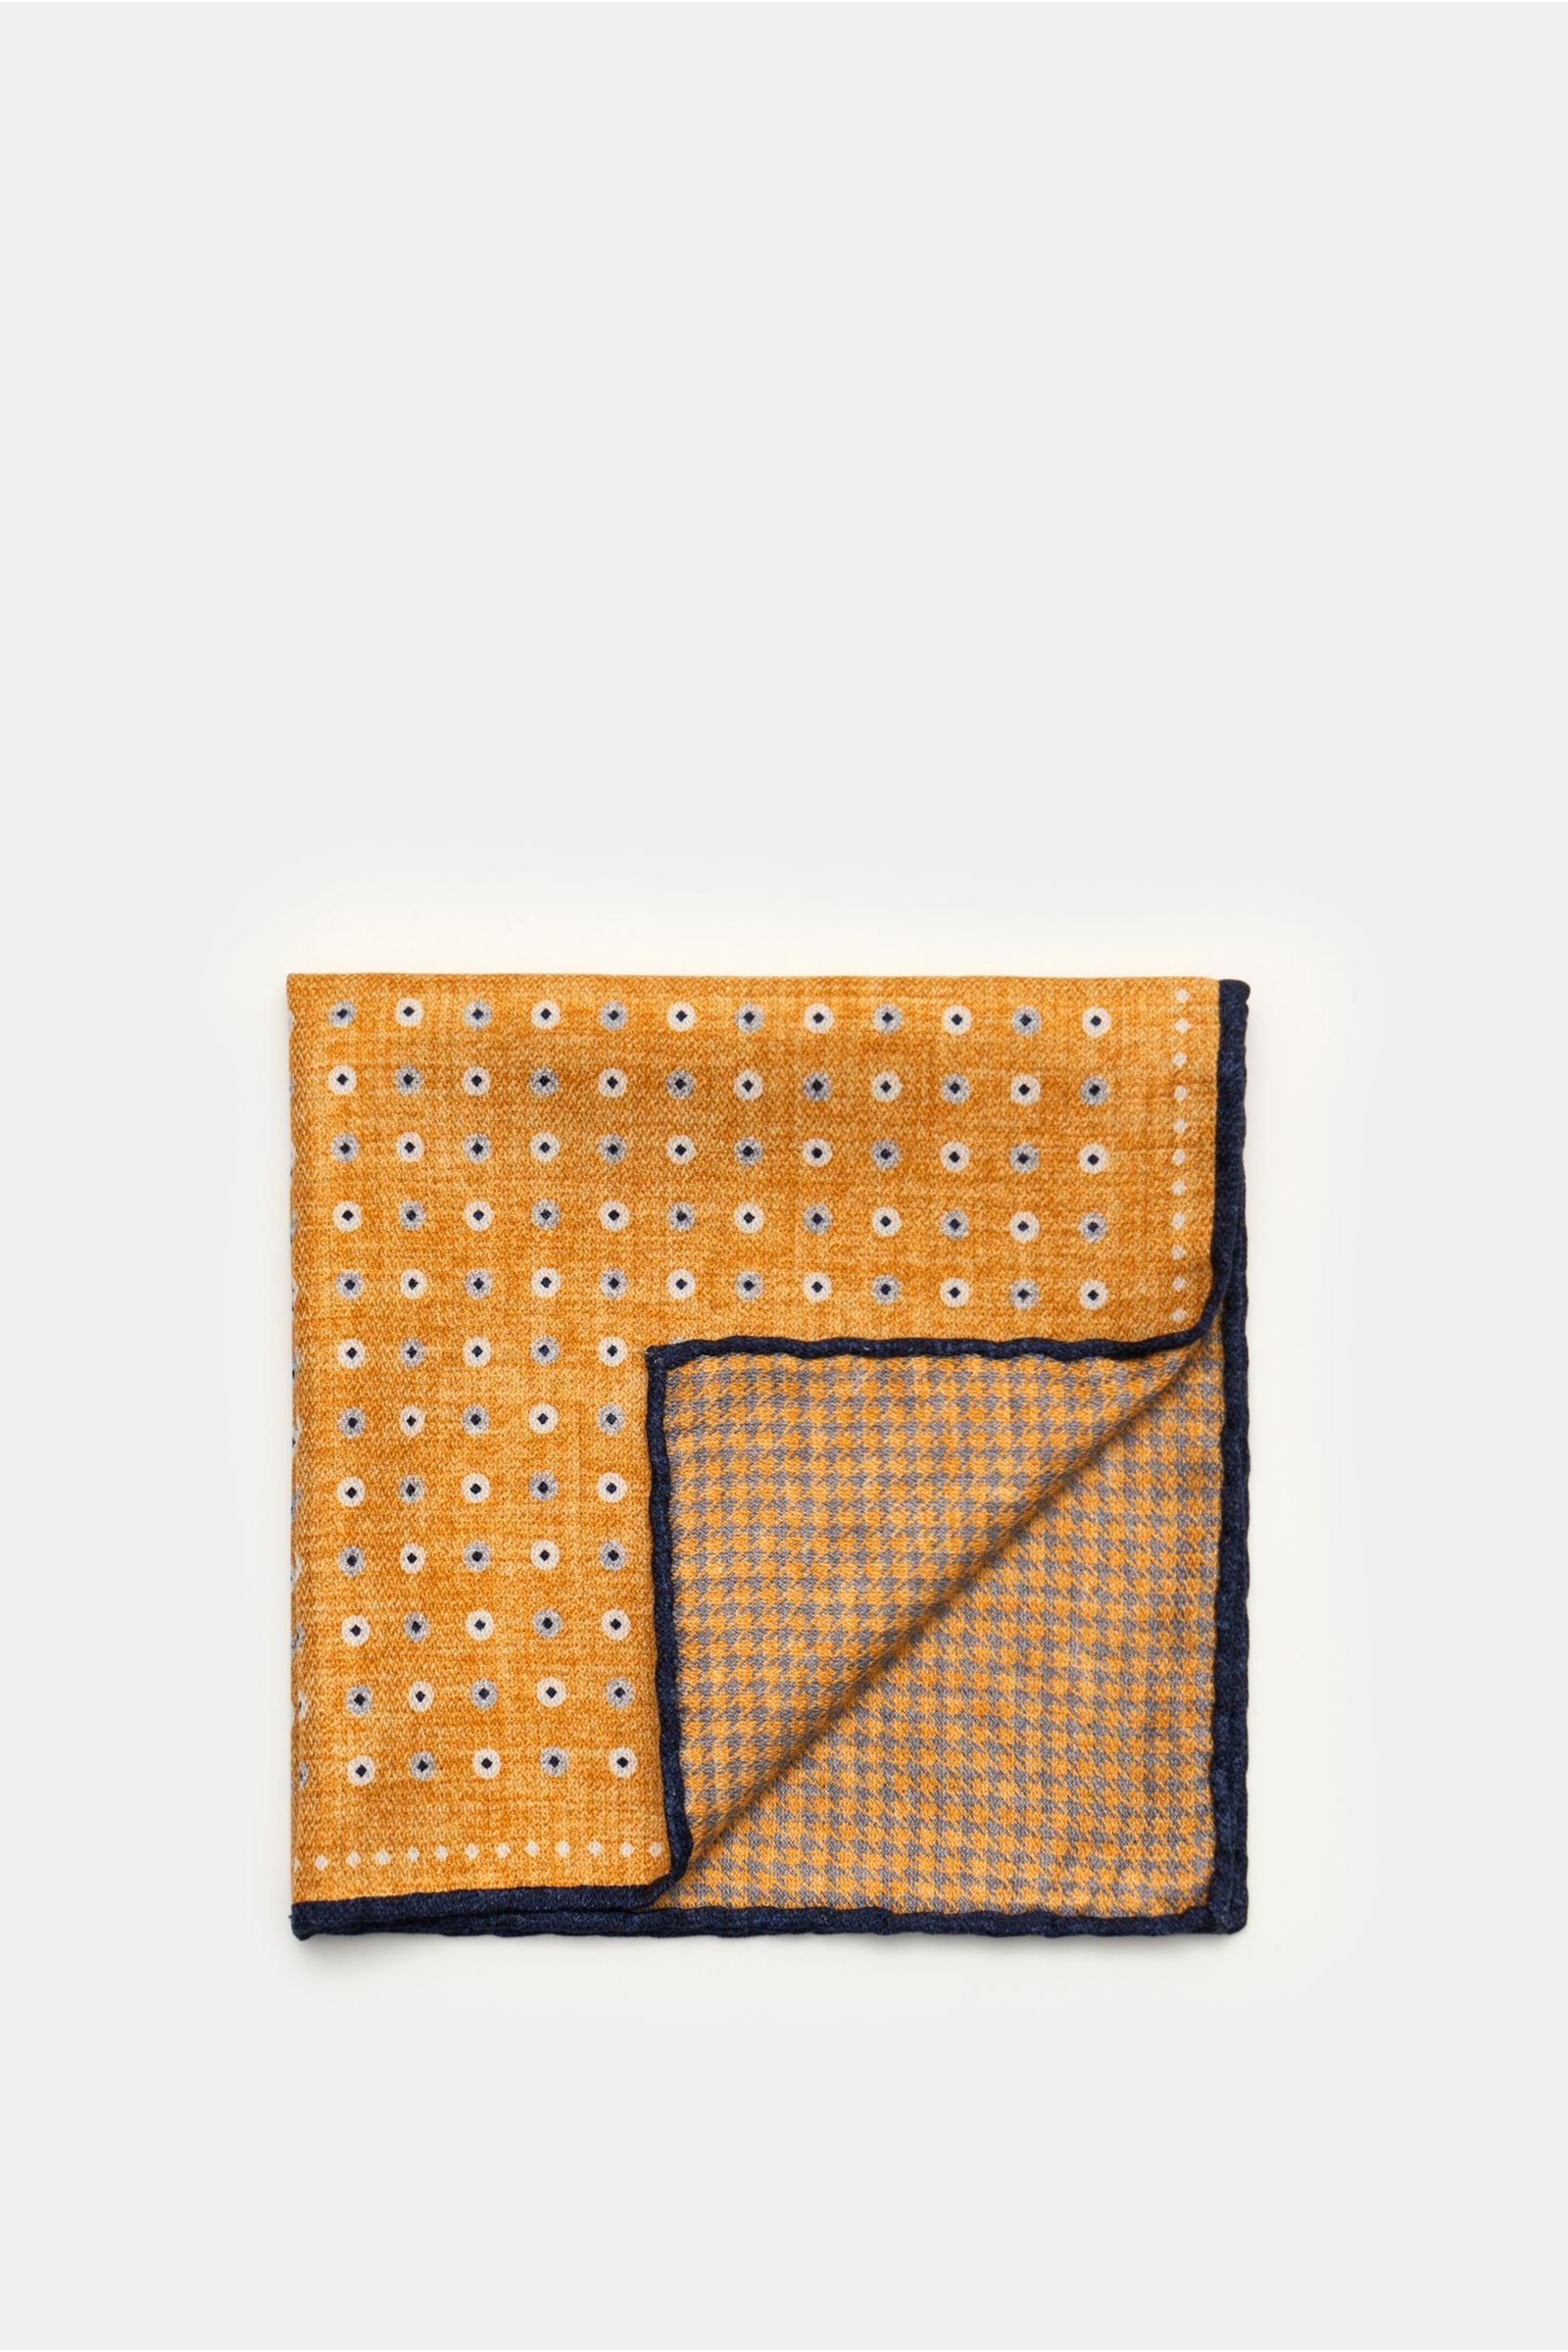 Pocket square yellow/grey-blue, dotted